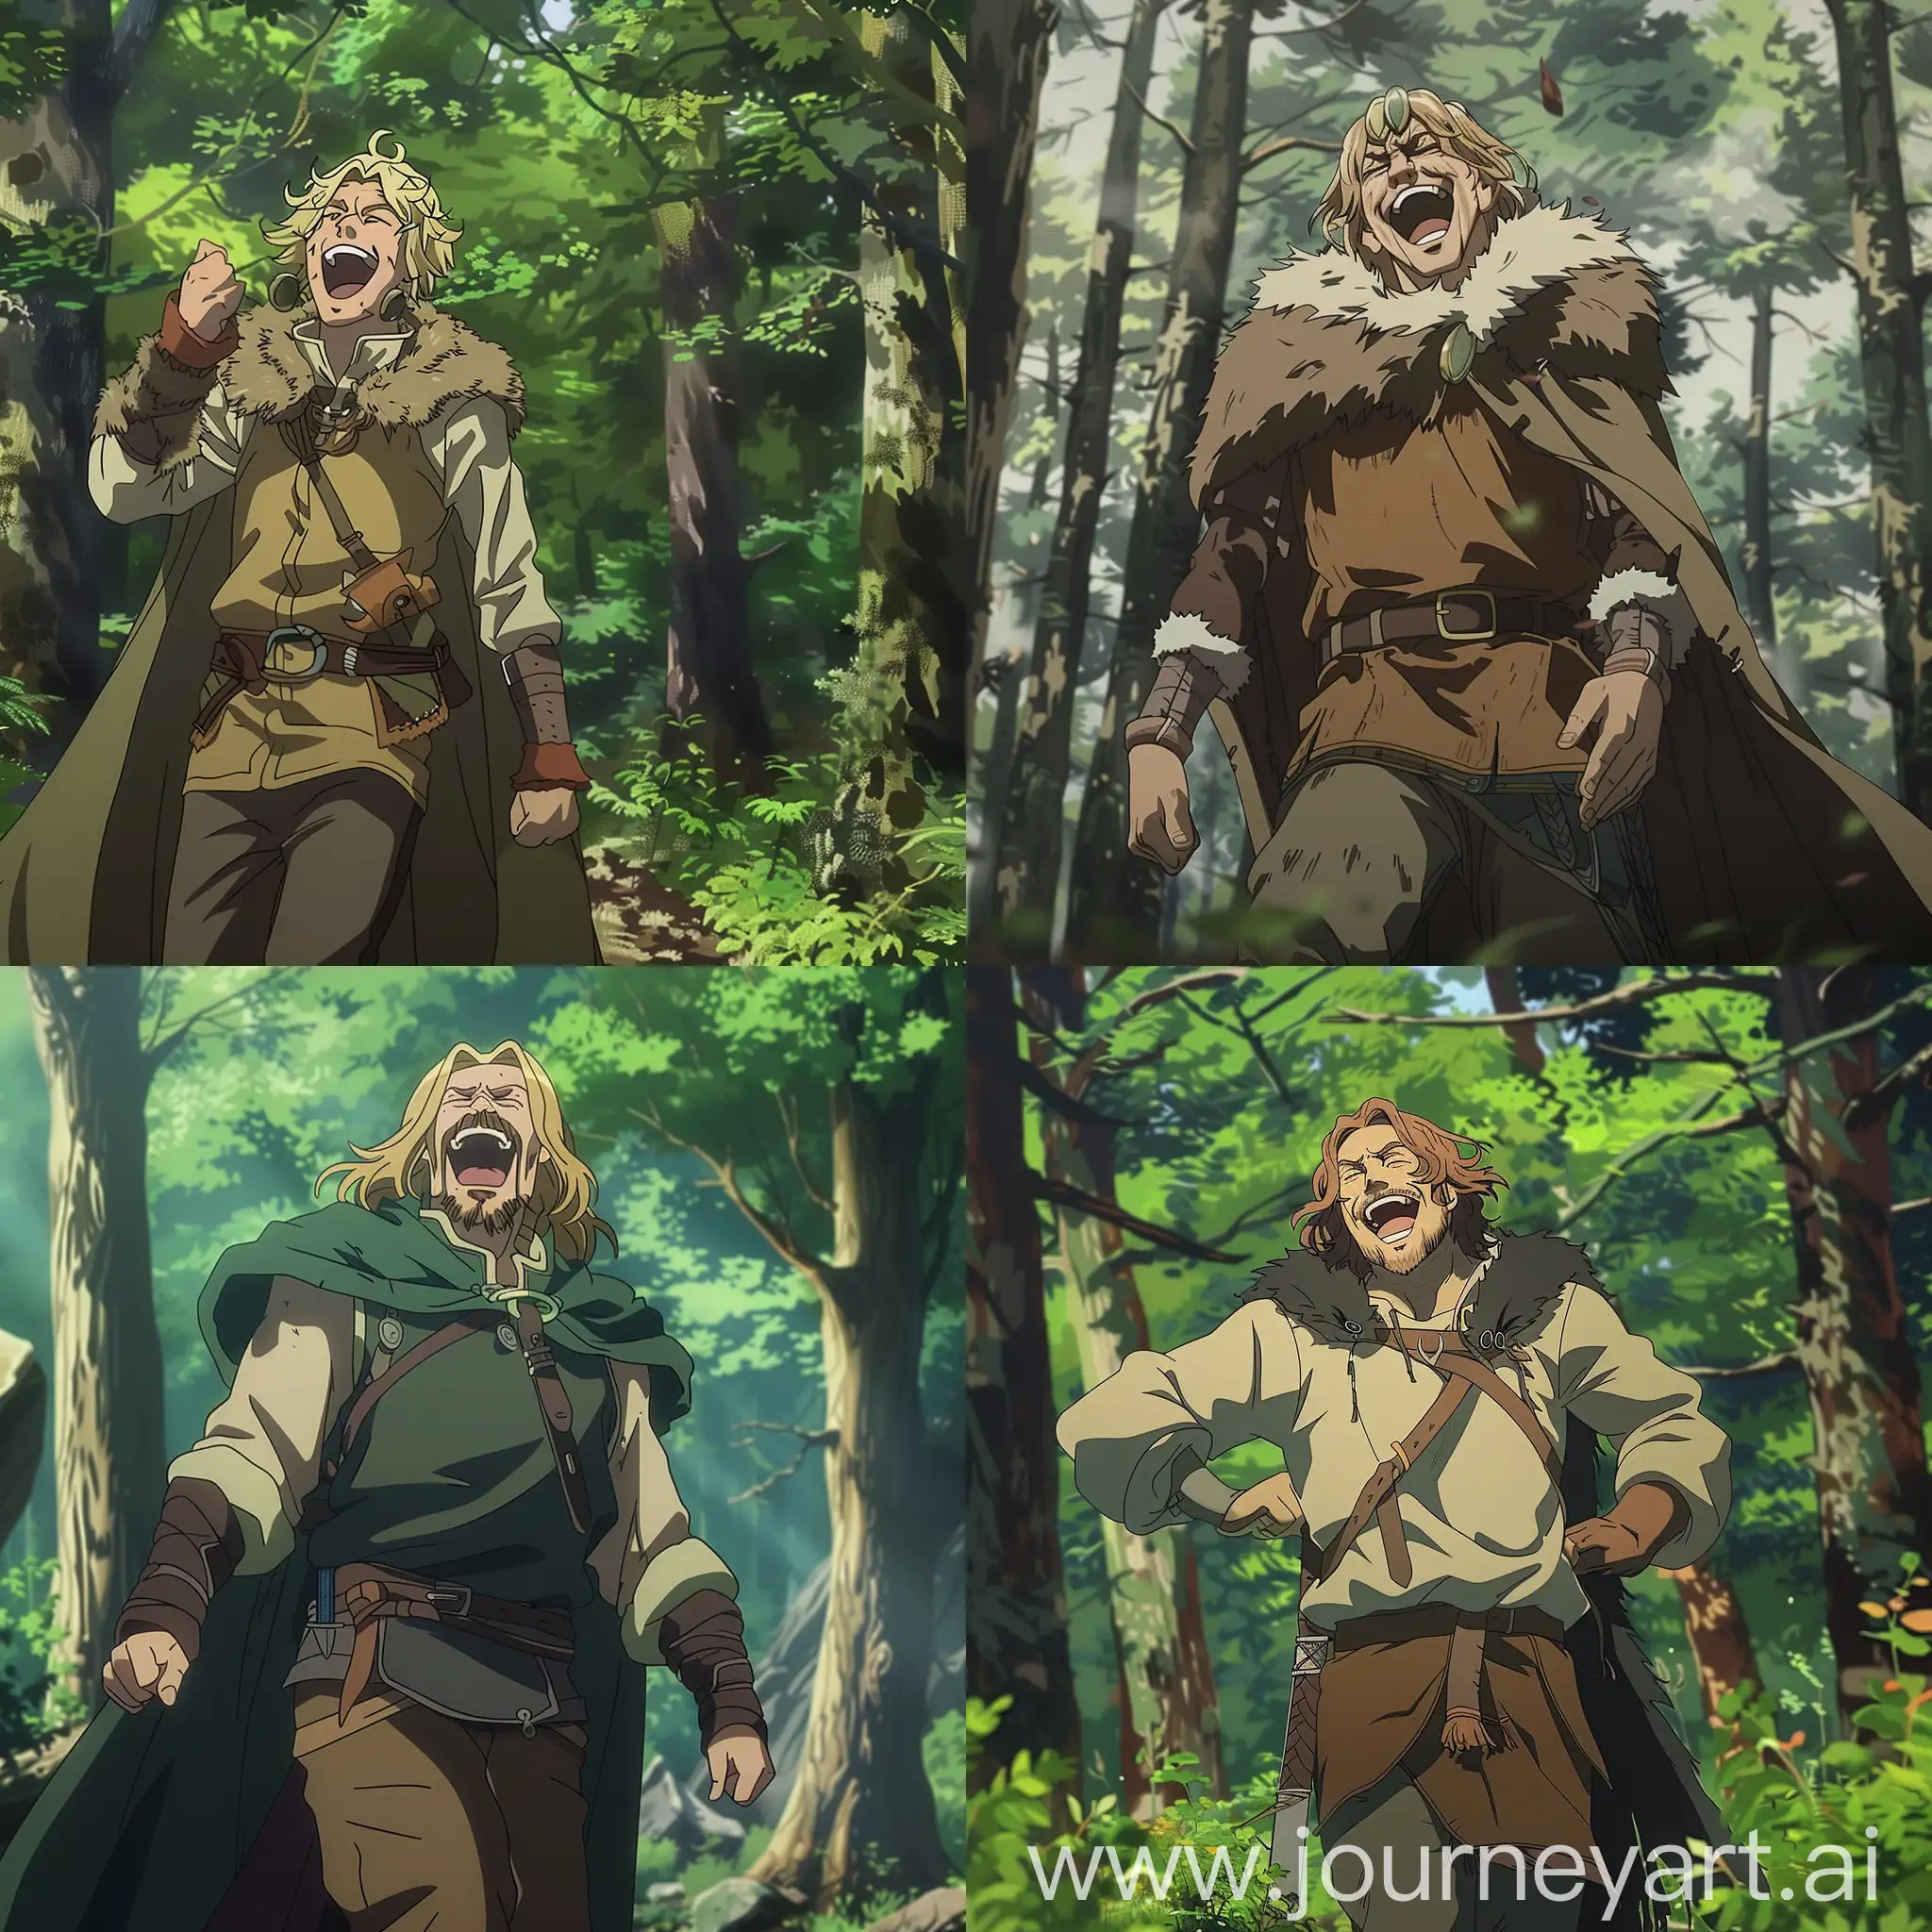 thors from vinland saga anime is walking in a forest and laughing